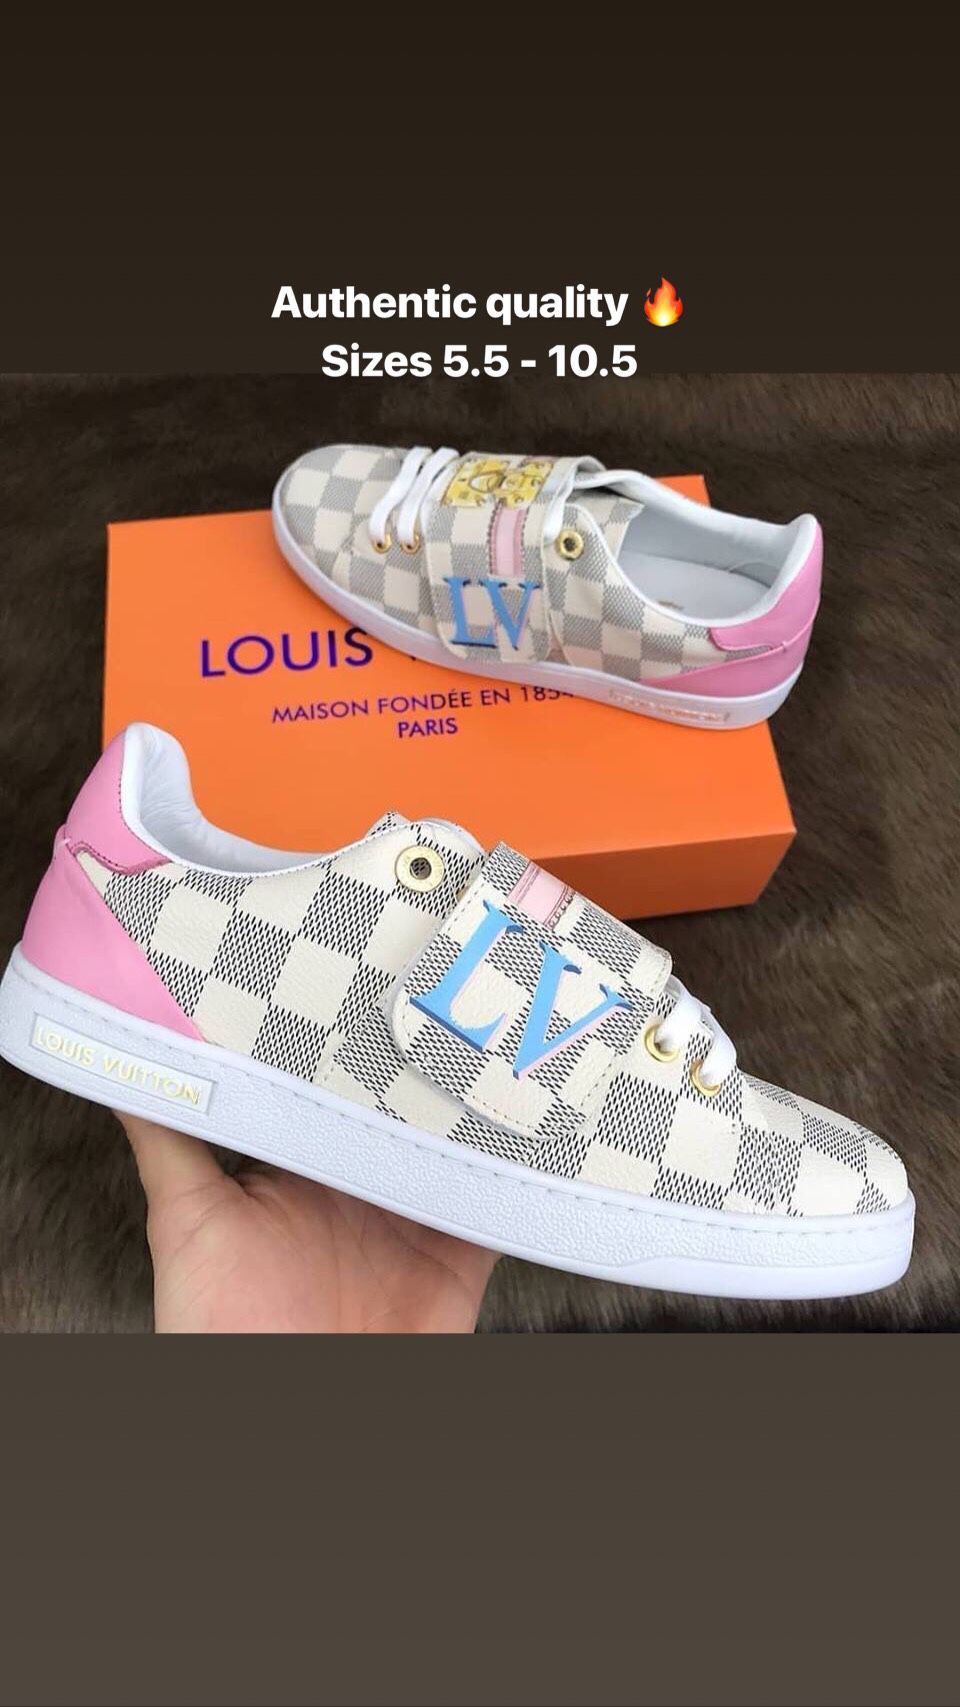 LV Women's Sneakers. Genuine leather. Authentic quality. Great for